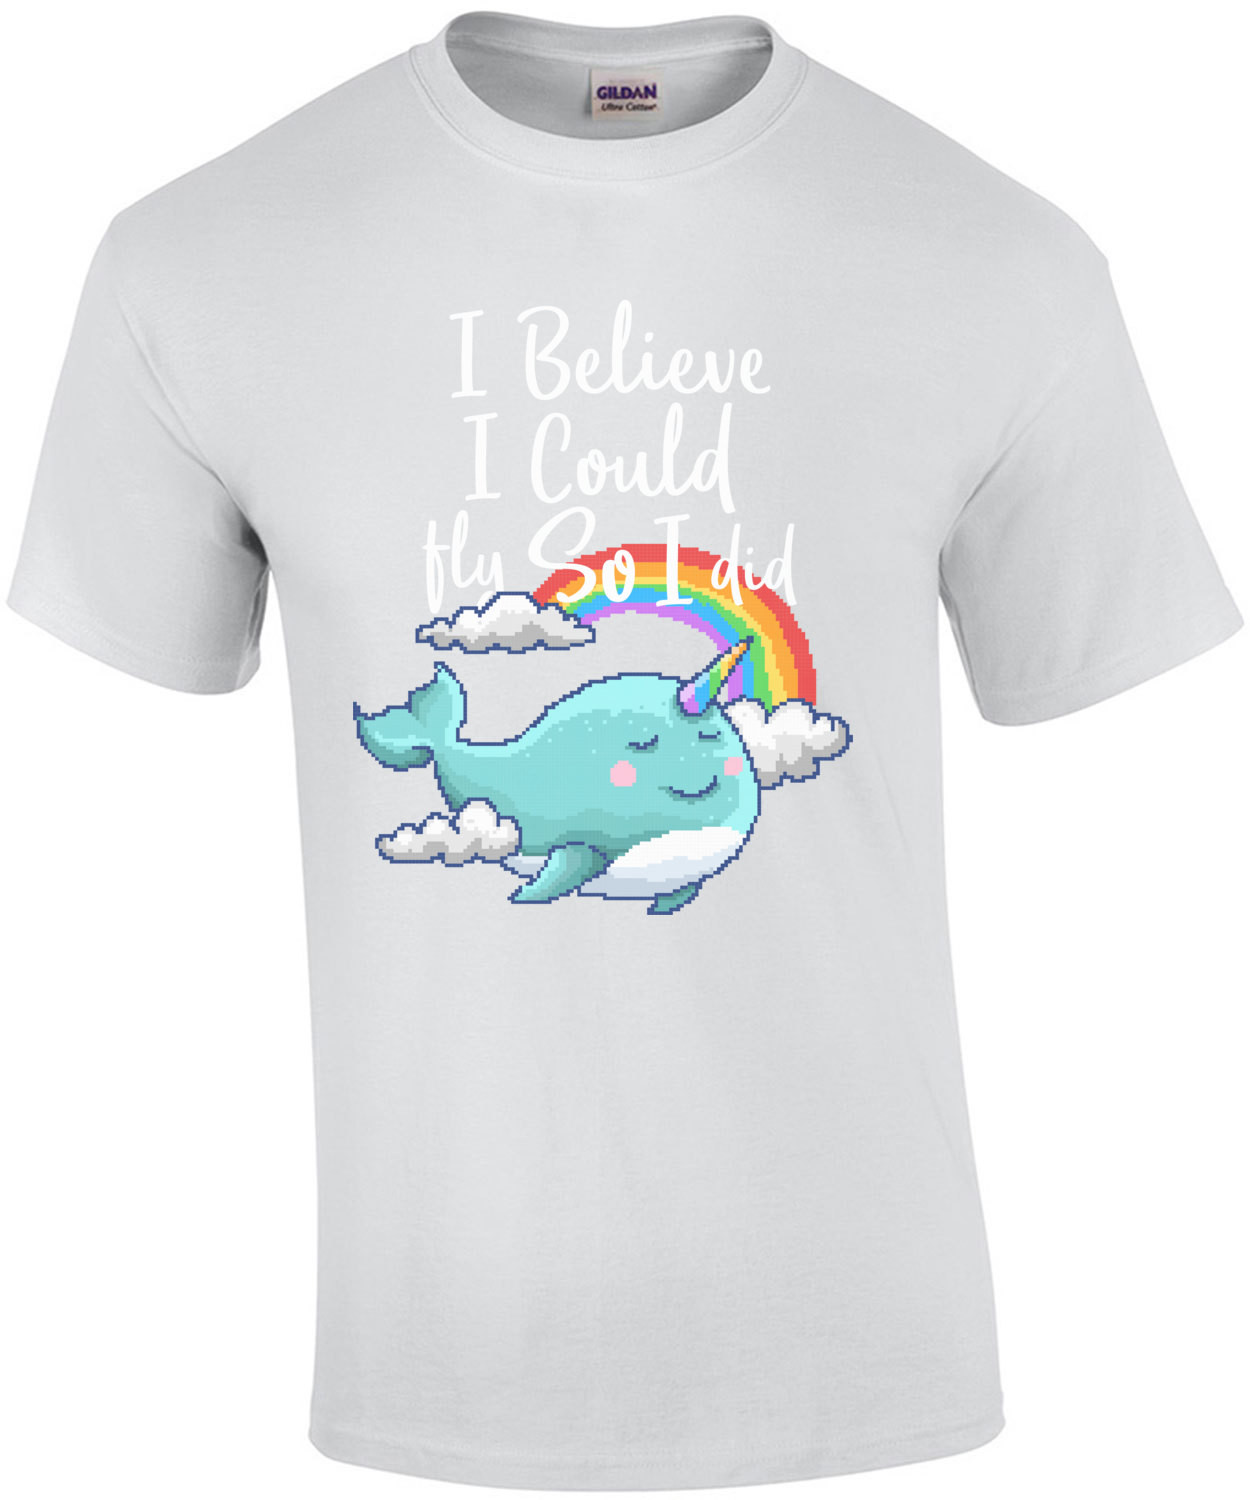 I Believe I Could Fly So I Did Motivational Narwhal T-Shirt